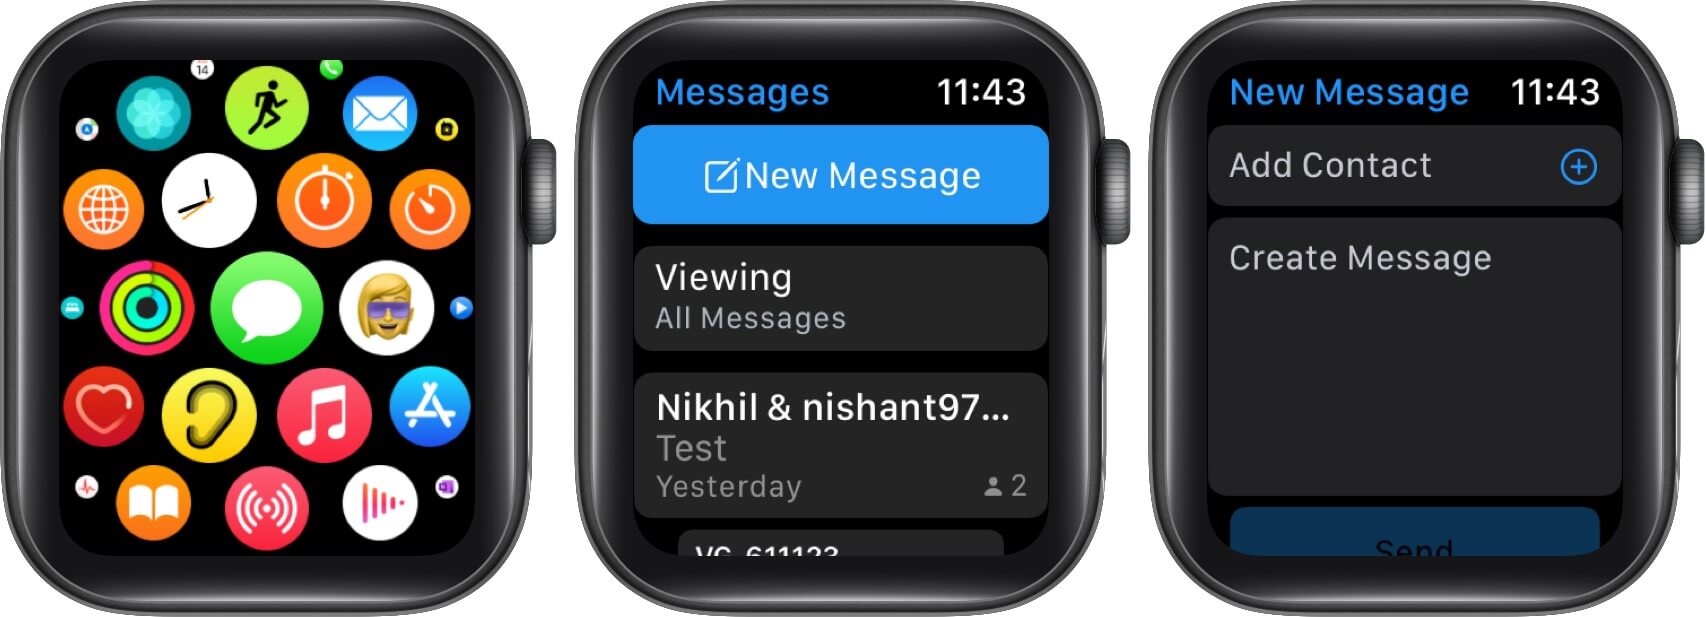 Open Messages App Tap on New Message and Then Tap on Create Message on Apple Watch